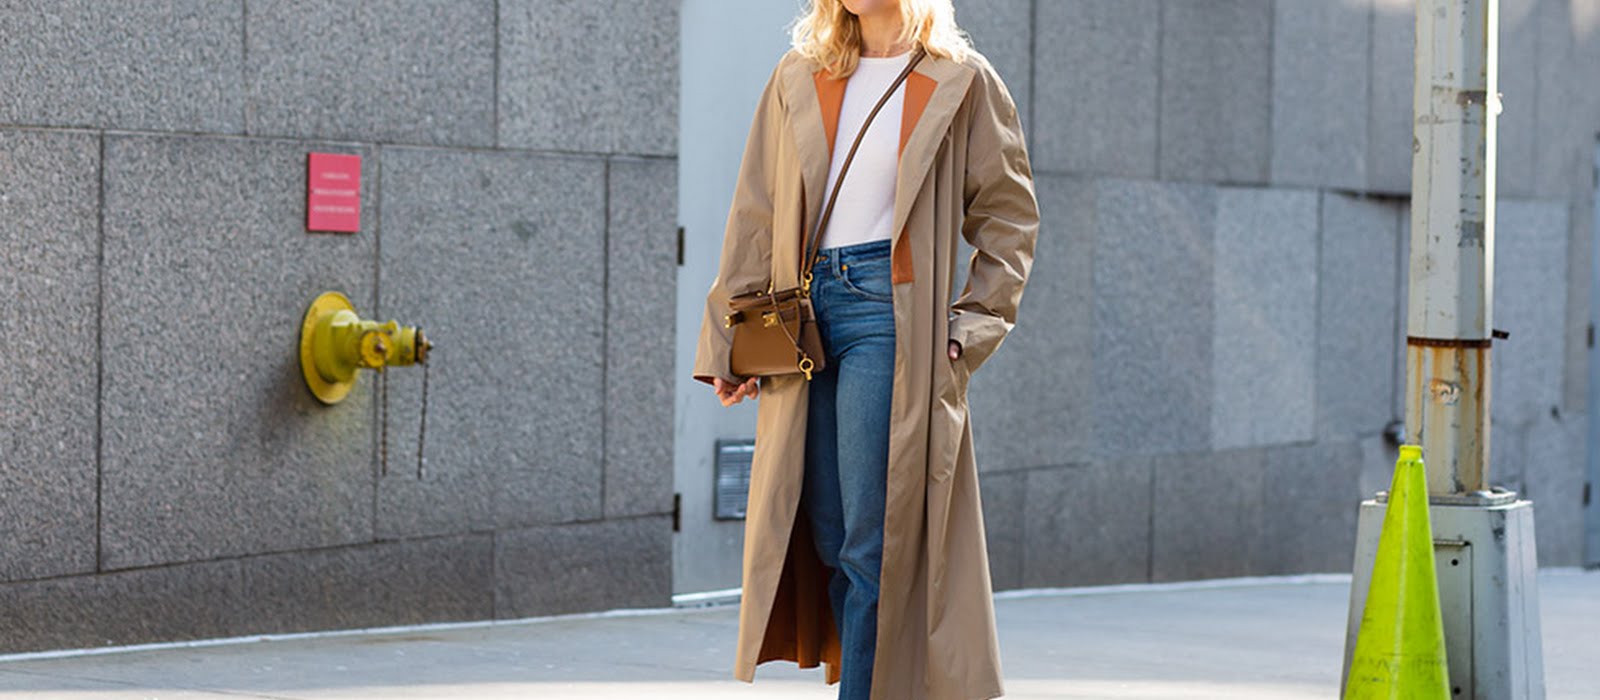 The camel trench coat: Classic or generic?